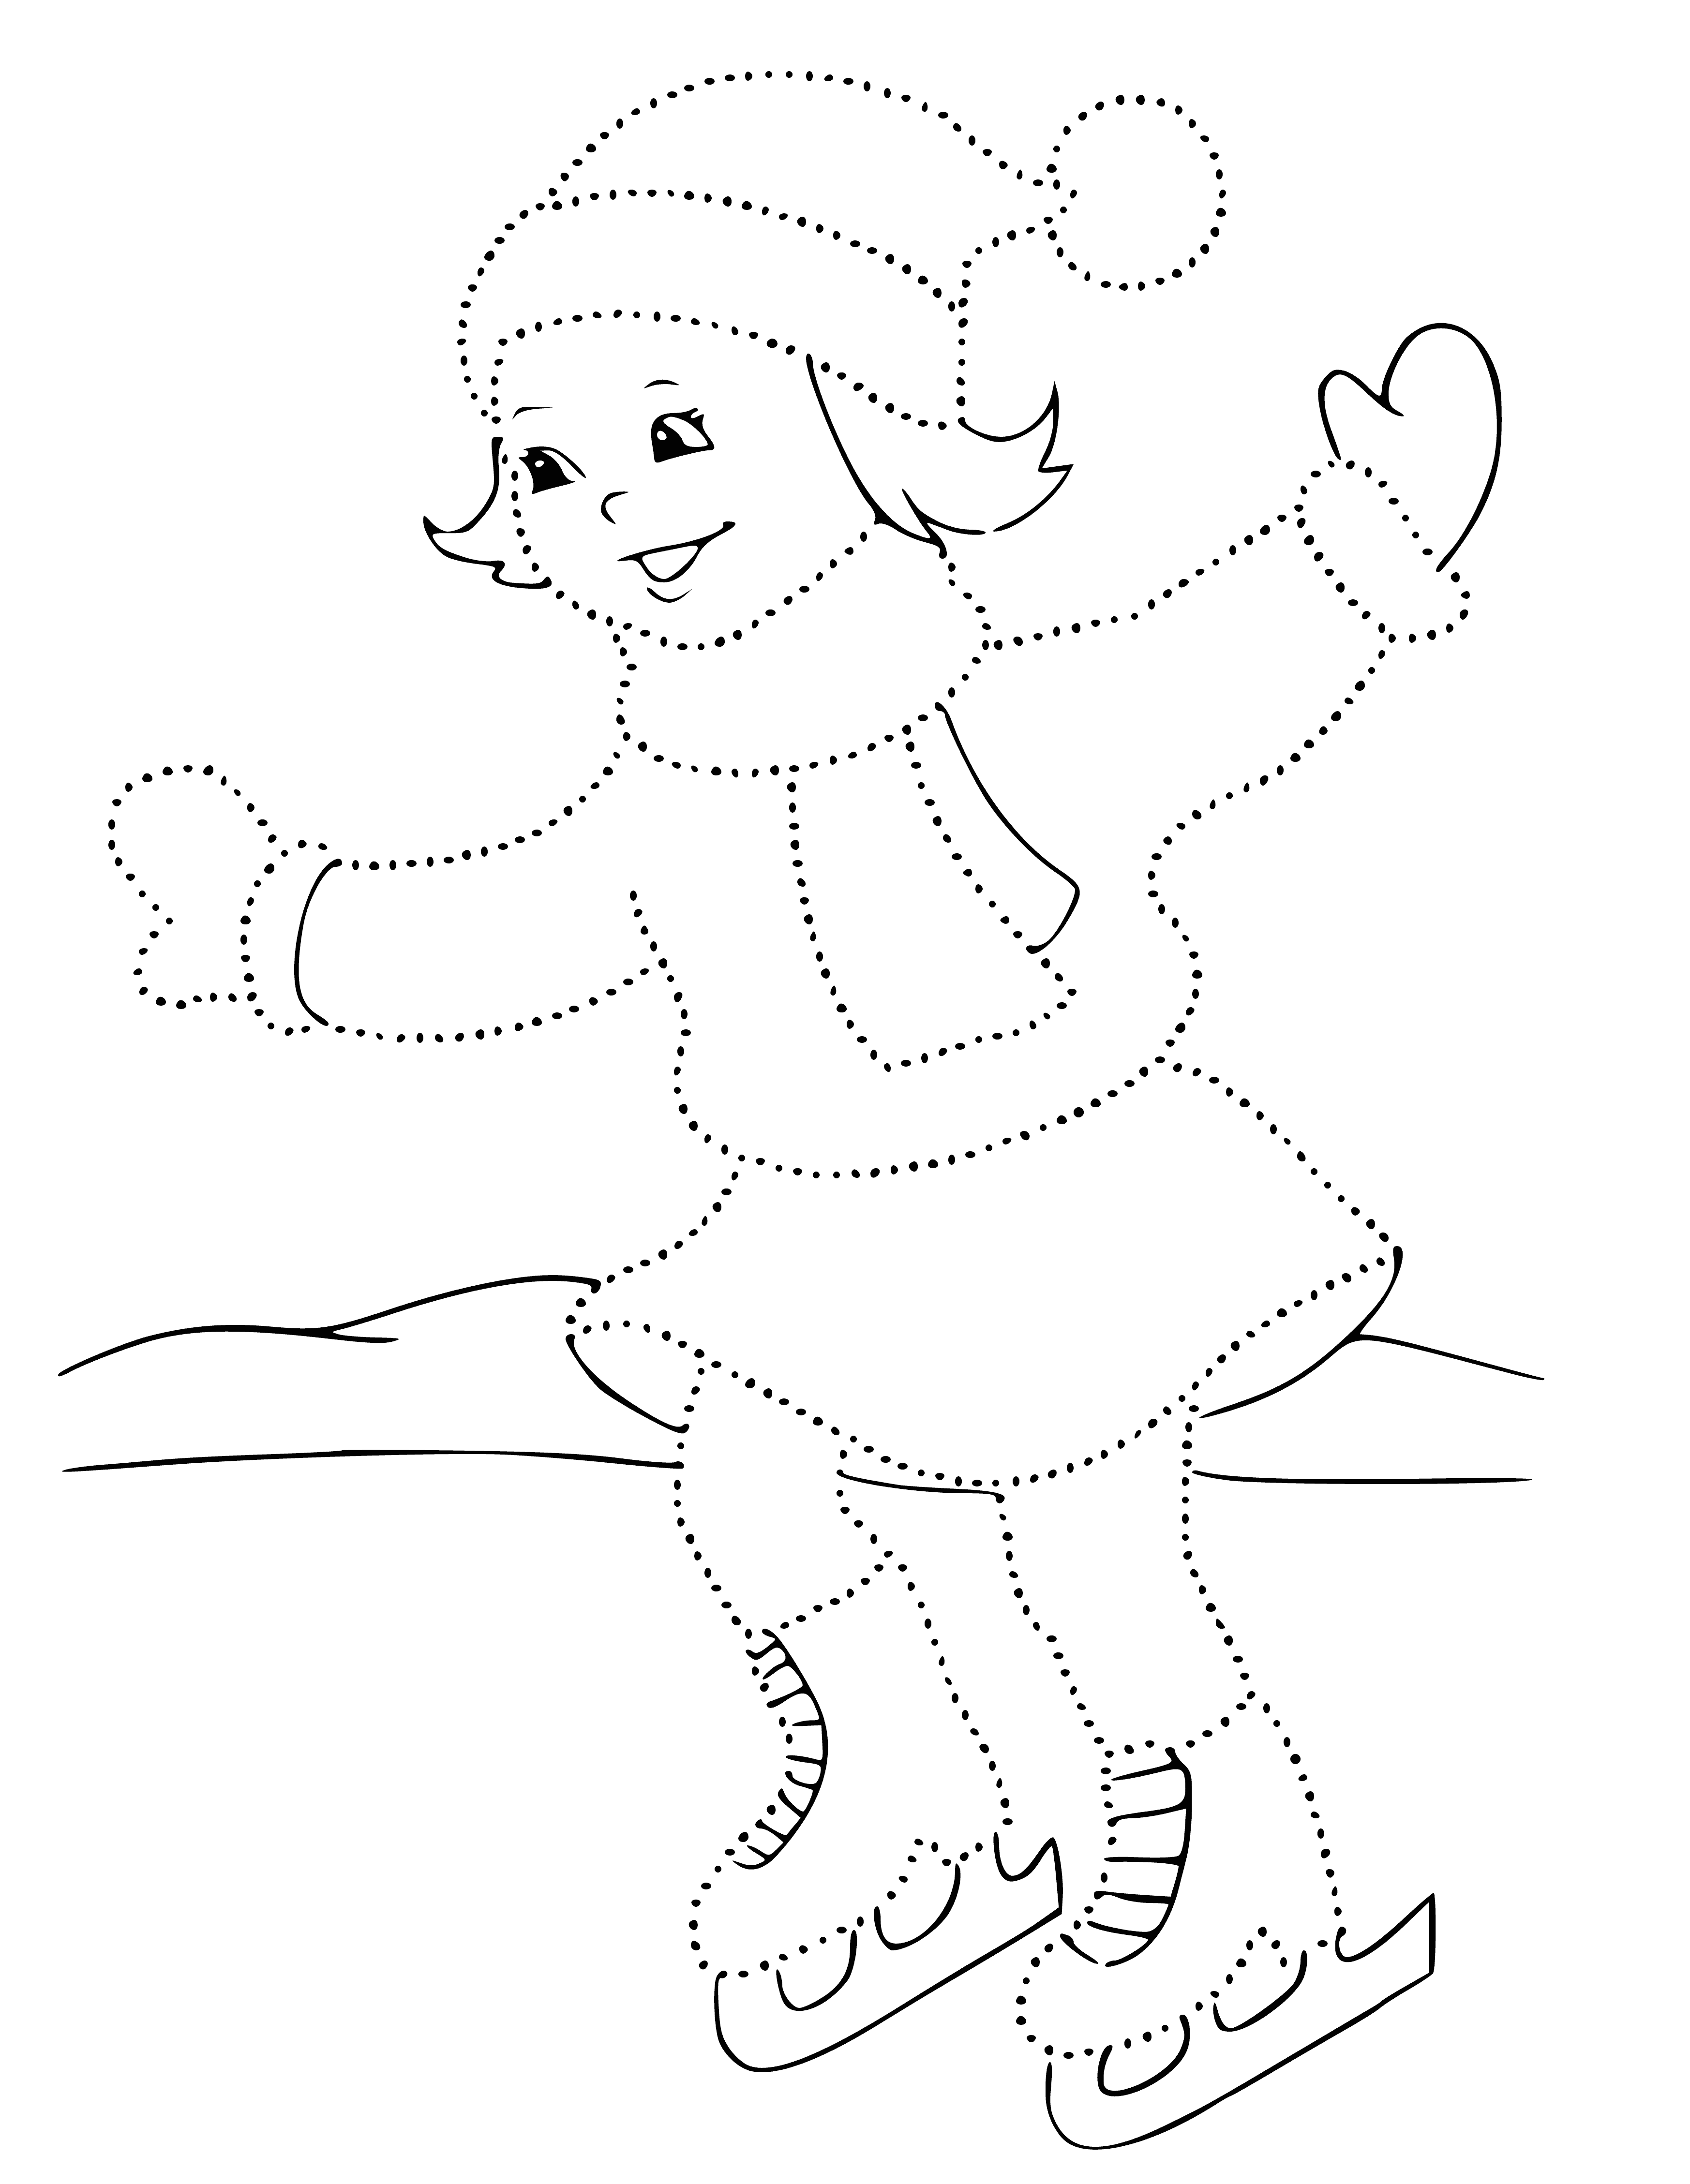 coloring page: Girl ice skating on frozen pond wearing blue dress and white scarf, hair blowing in the wind.